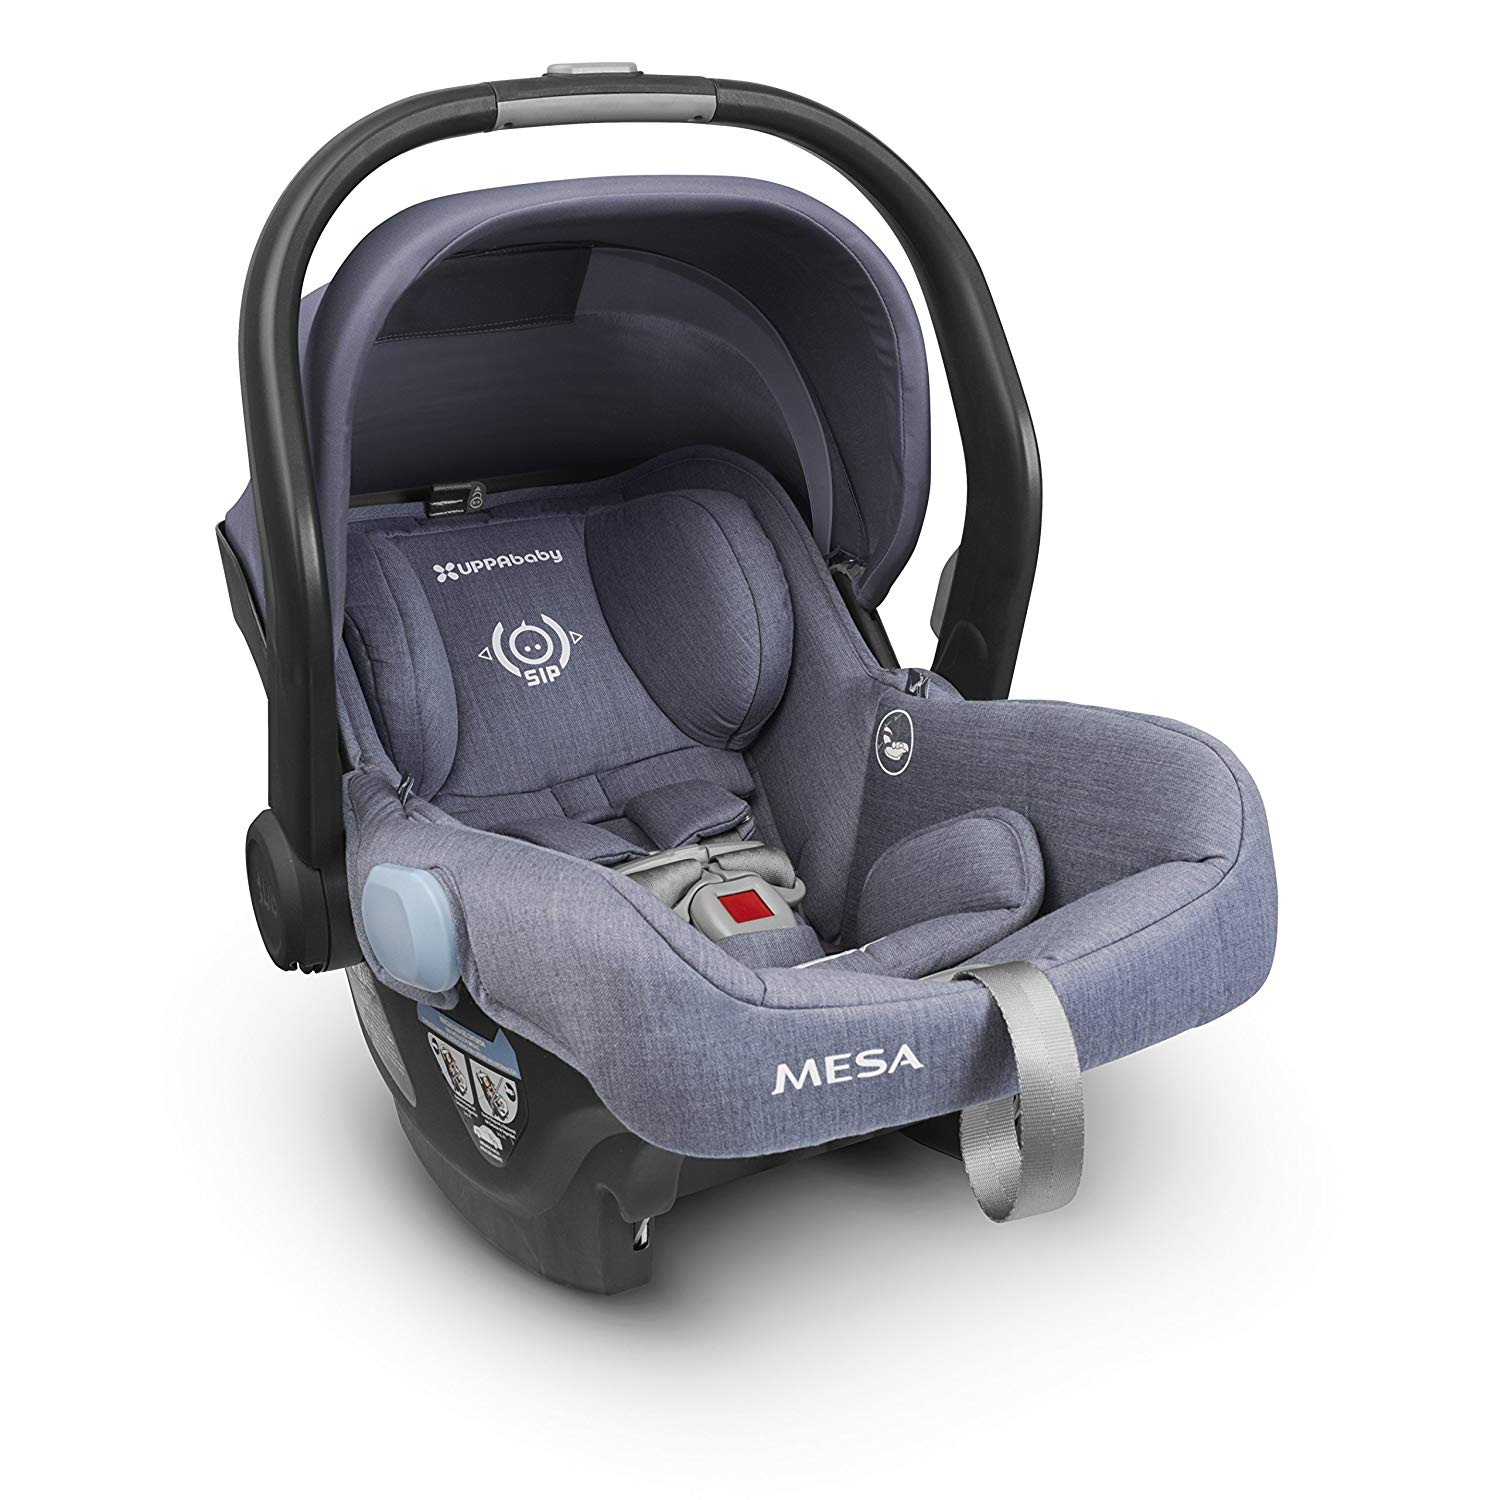 mesa car seat height and weight